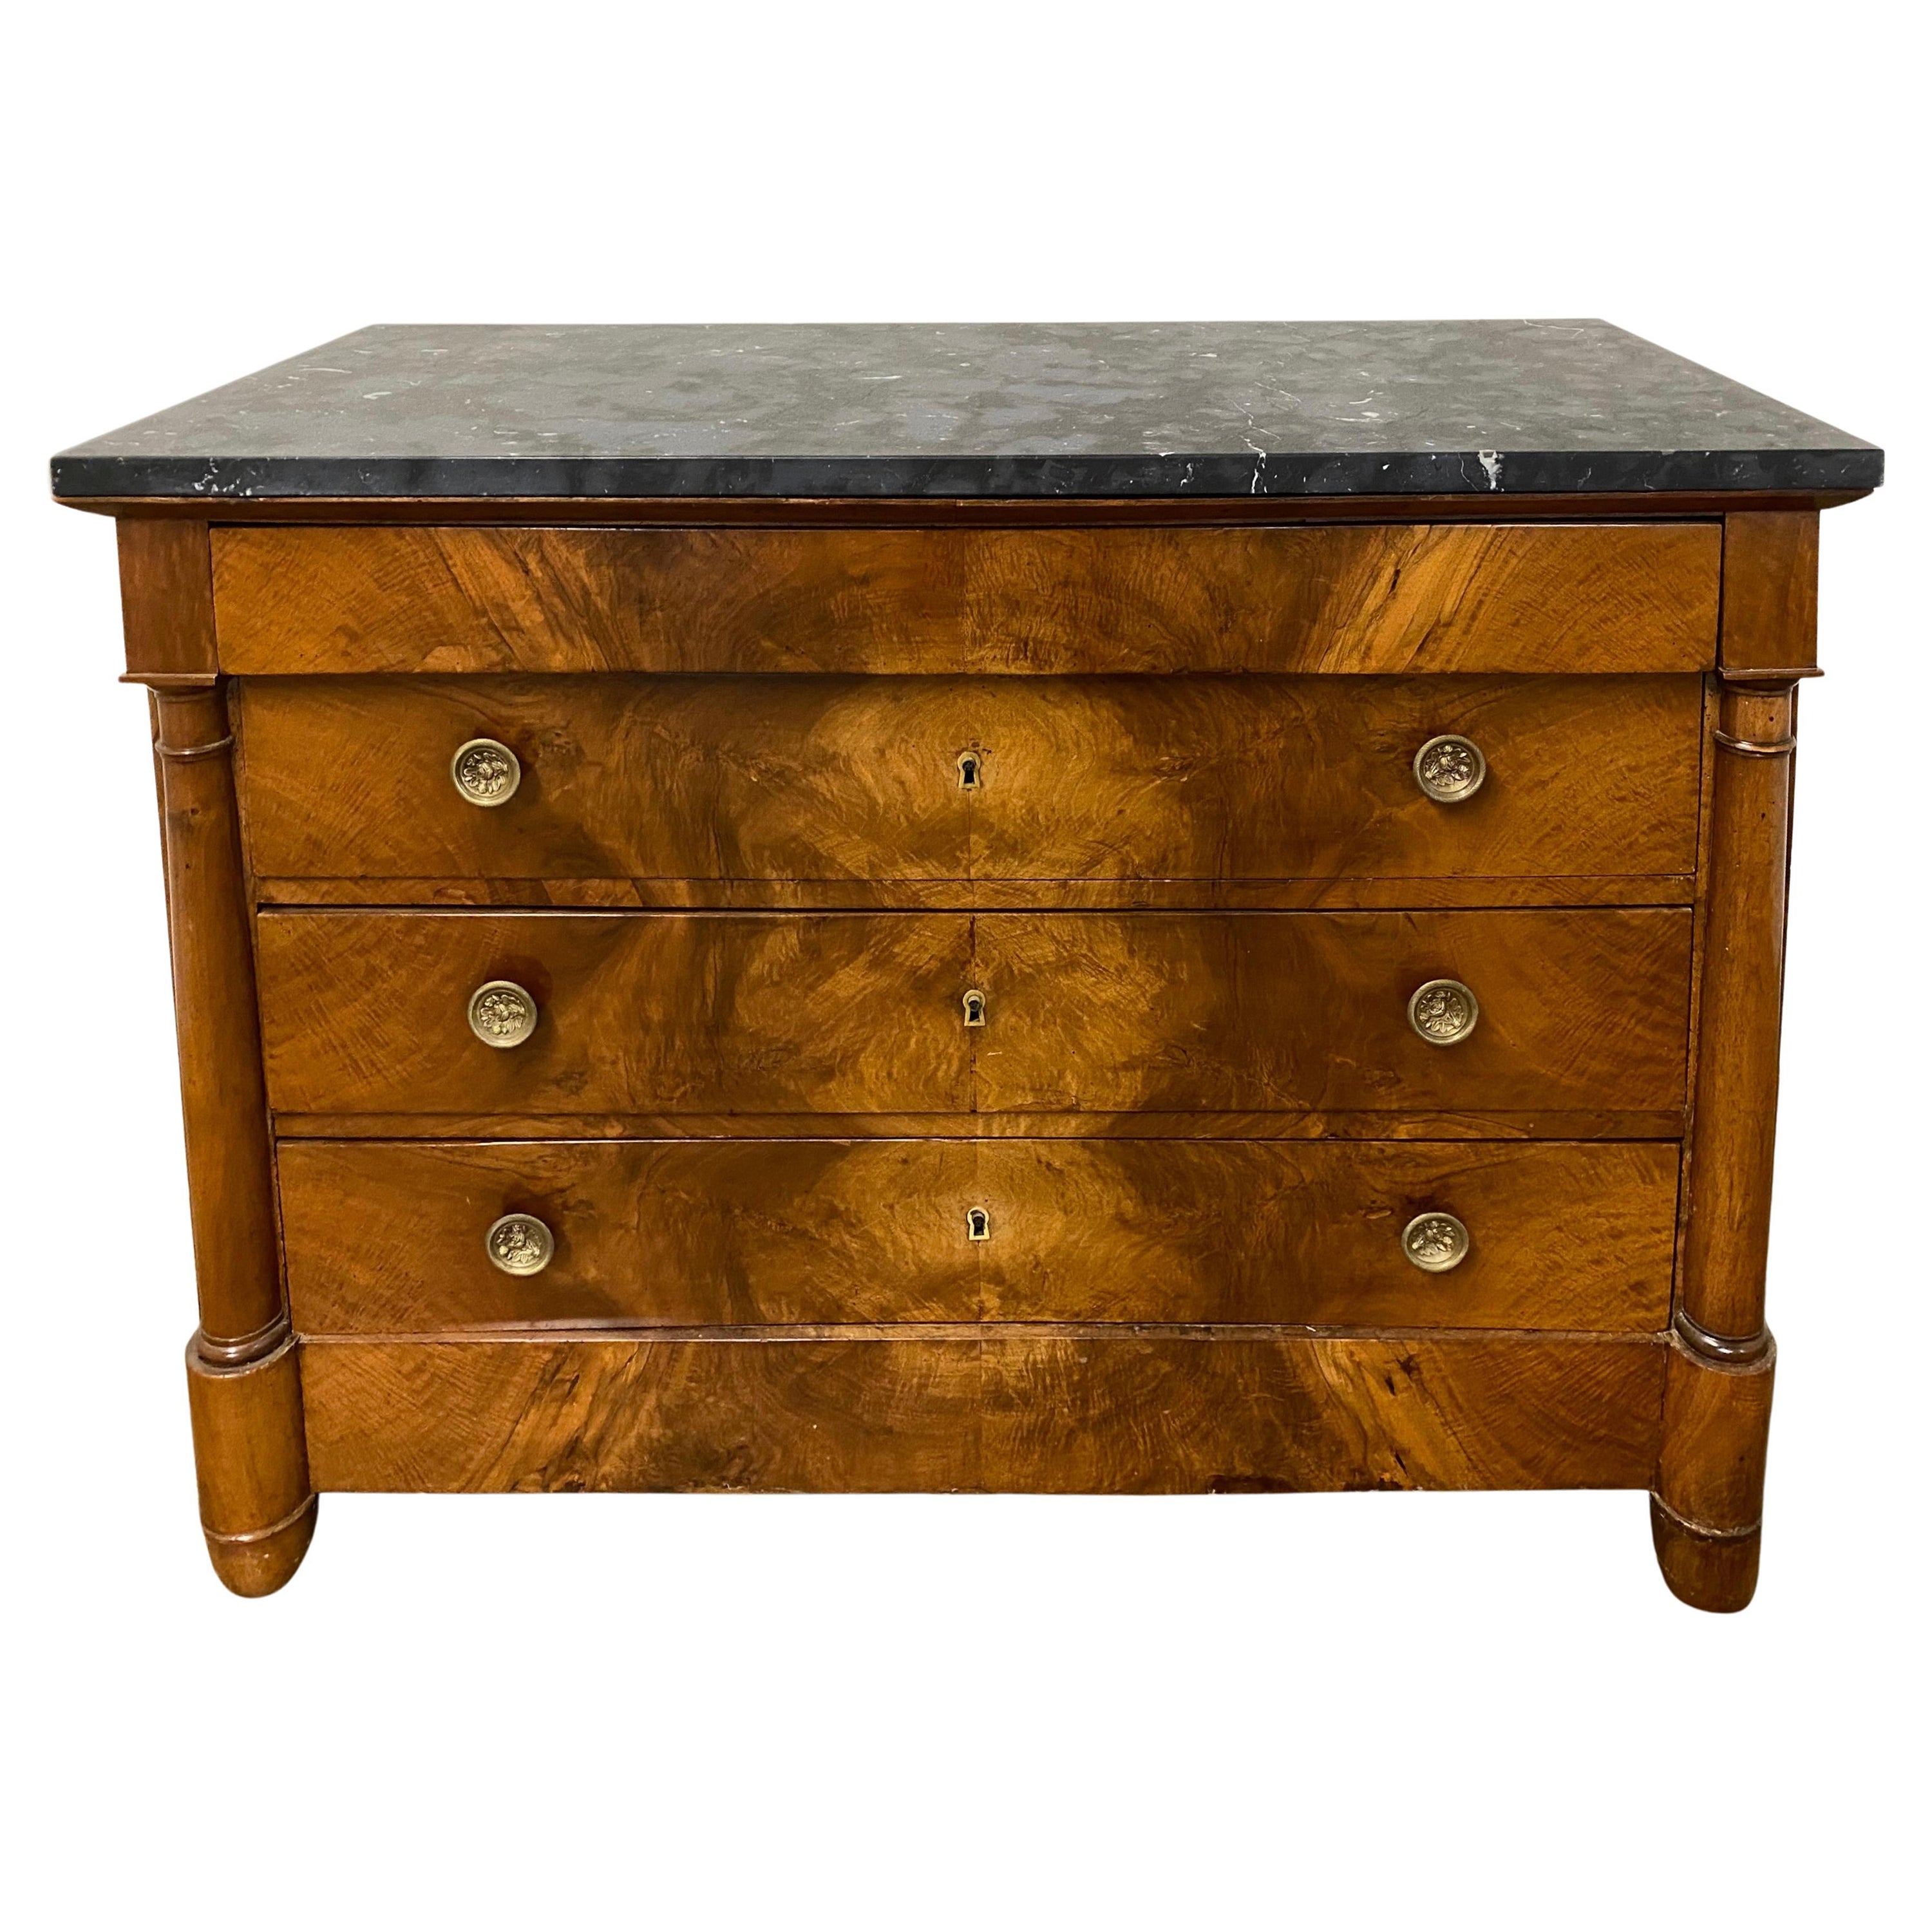 Early 19th Century French Empire Period Commode